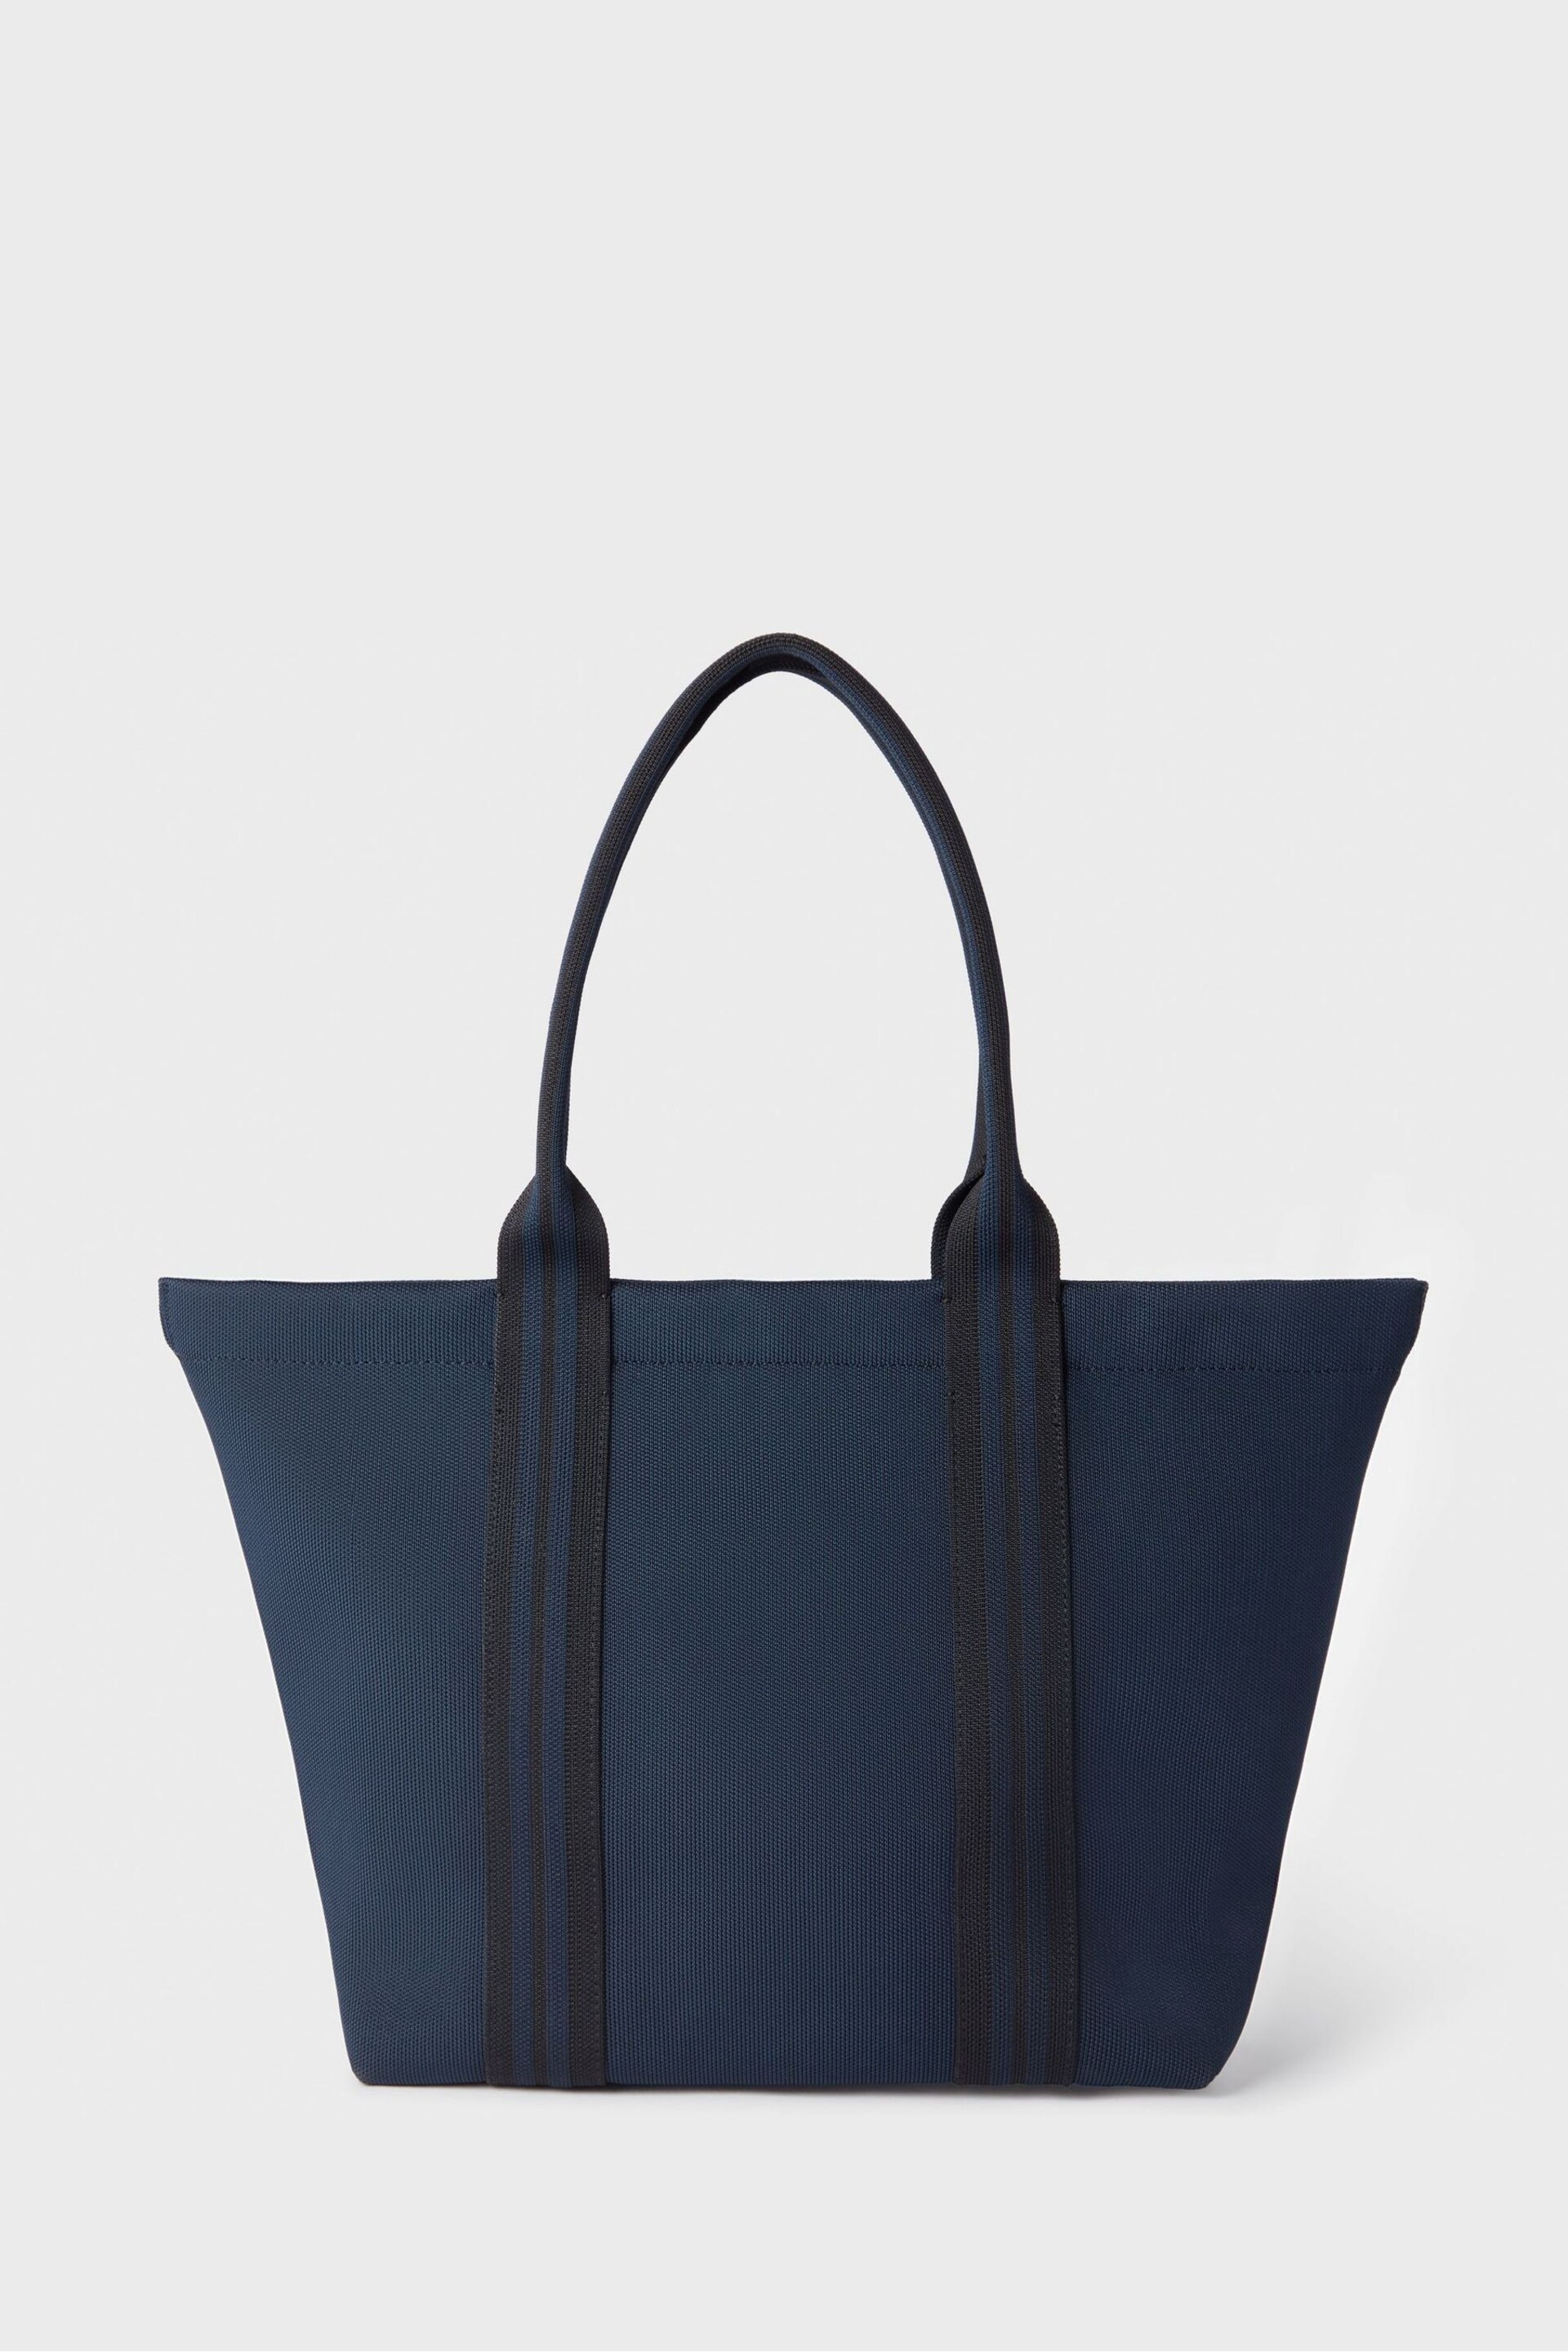 Osprey London The Knitted Tote Bag - Image 2 of 5